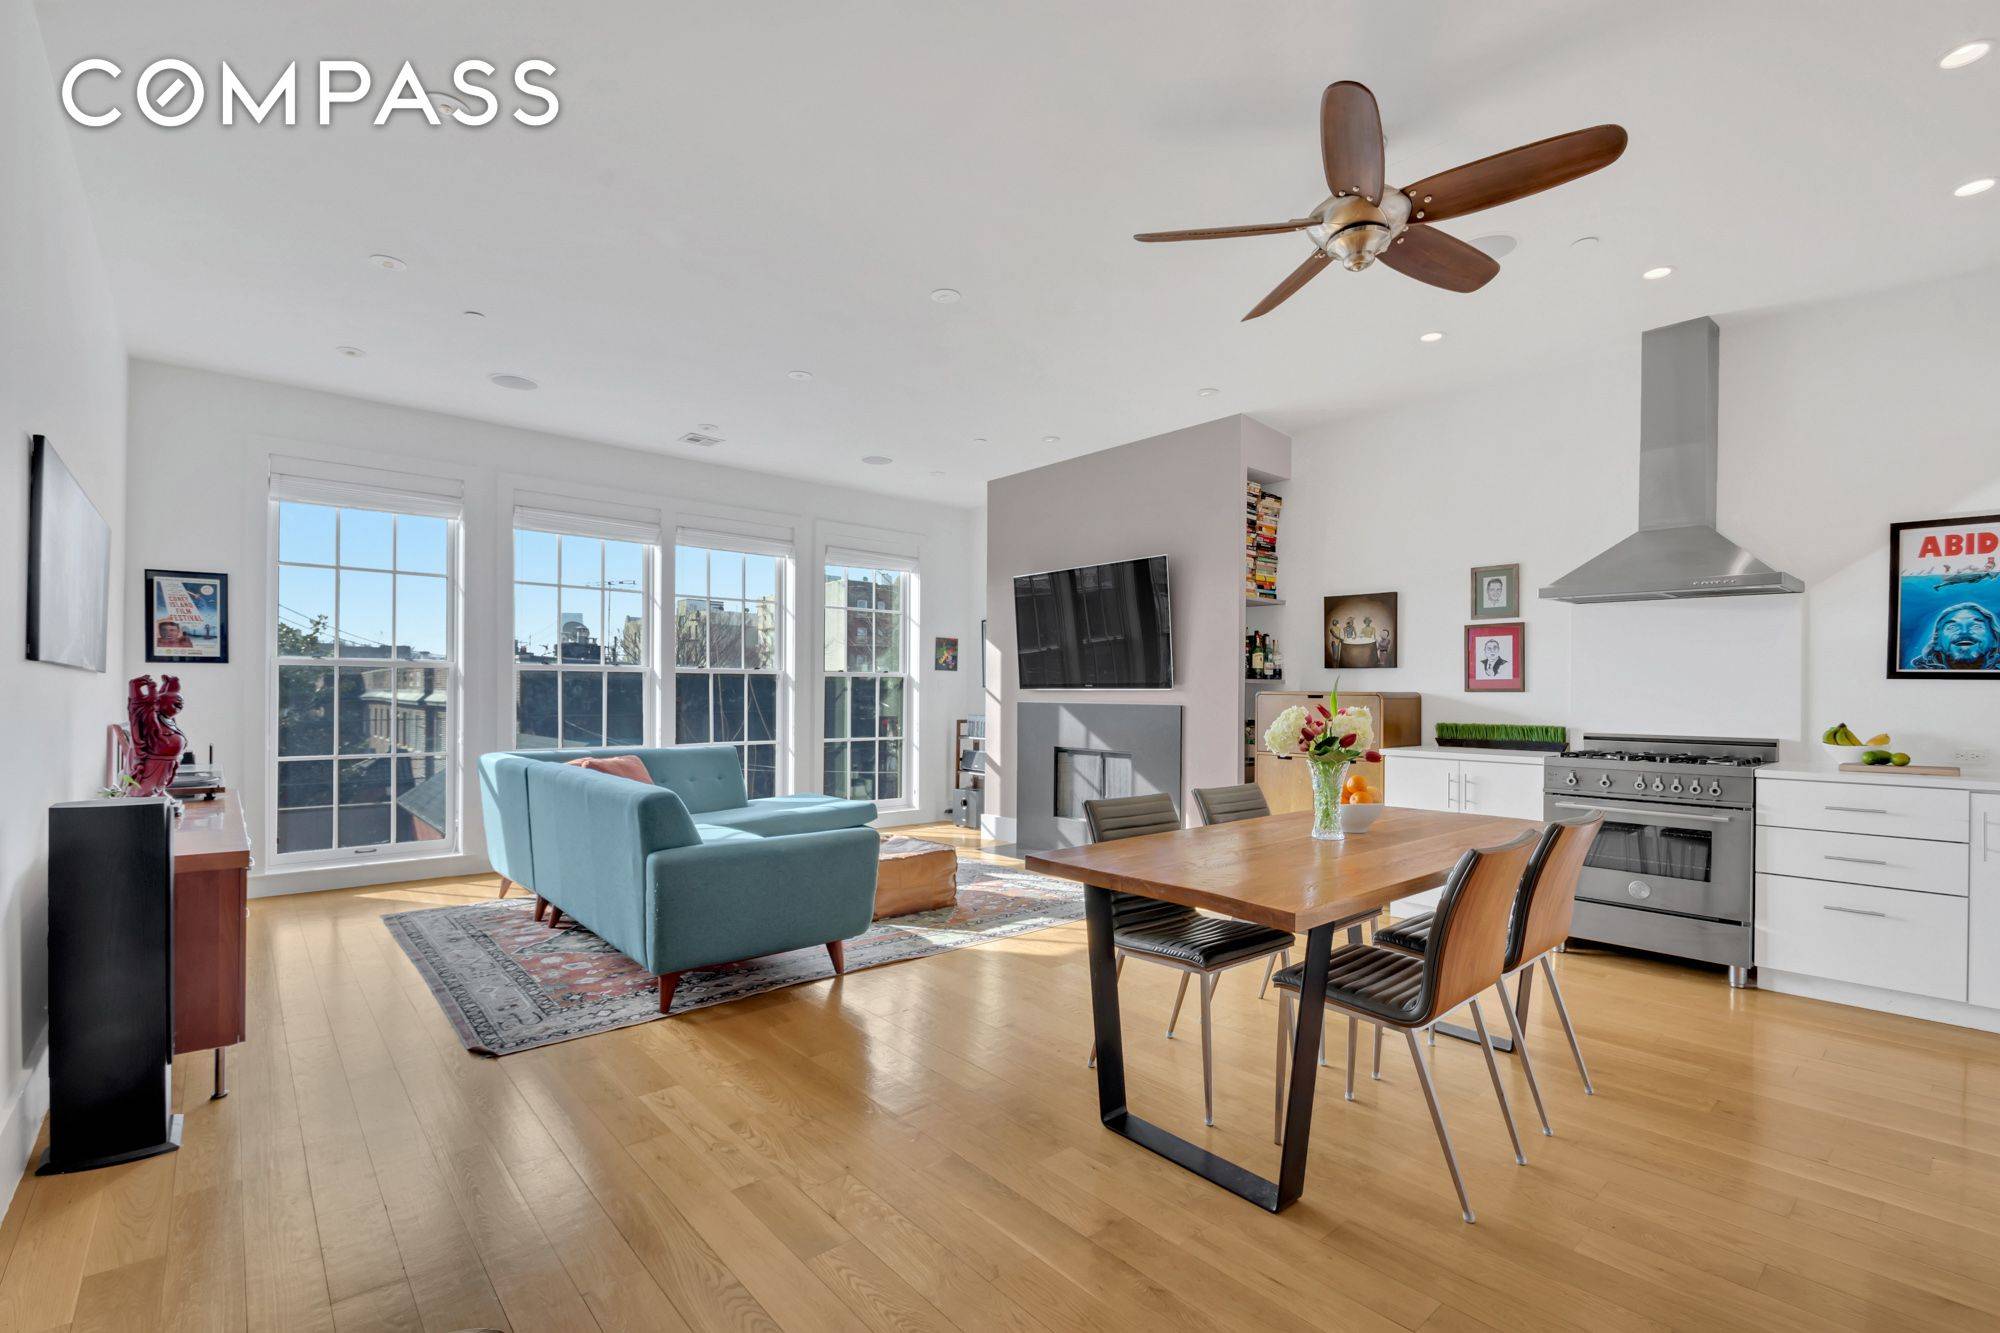 The Lofts at Bay Ridge is a contemporary and intimate 6 unit condominium comprised of three modern two story townhouses with just two units per building.